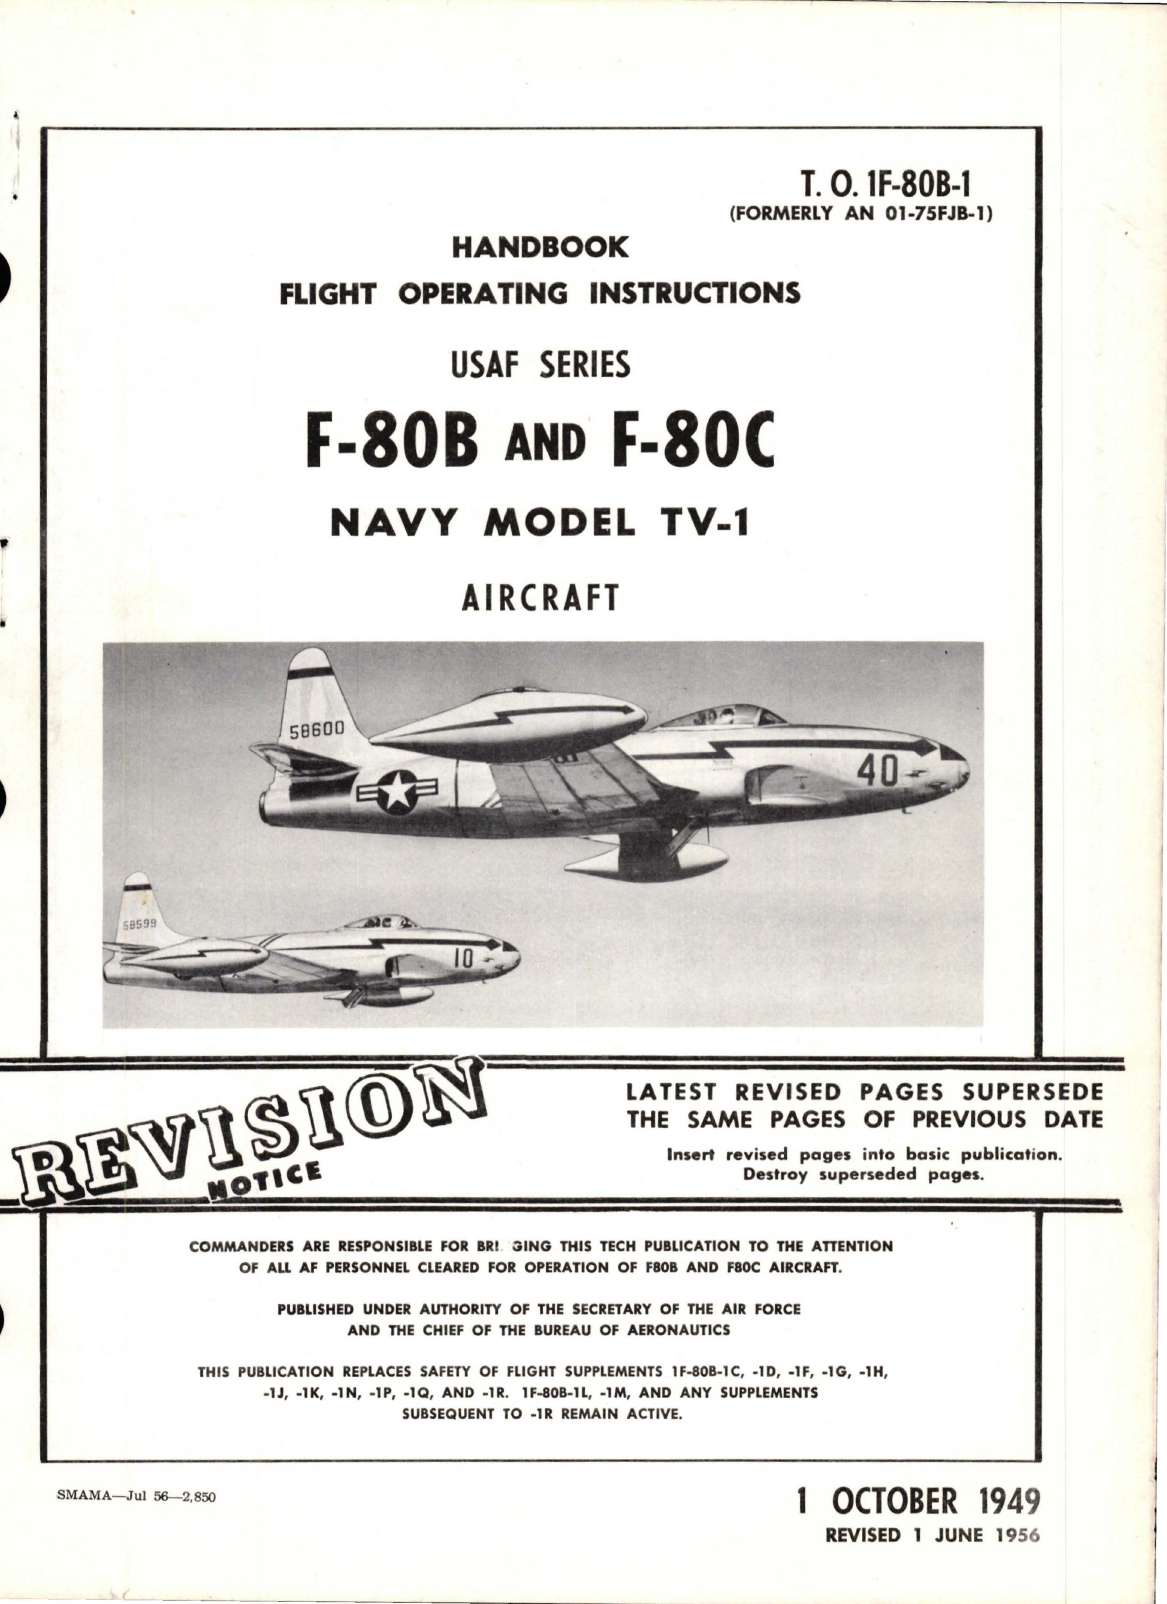 Sample page 1 from AirCorps Library document: Flight Operating Instructions for F-80B, F-80C, and TV-1